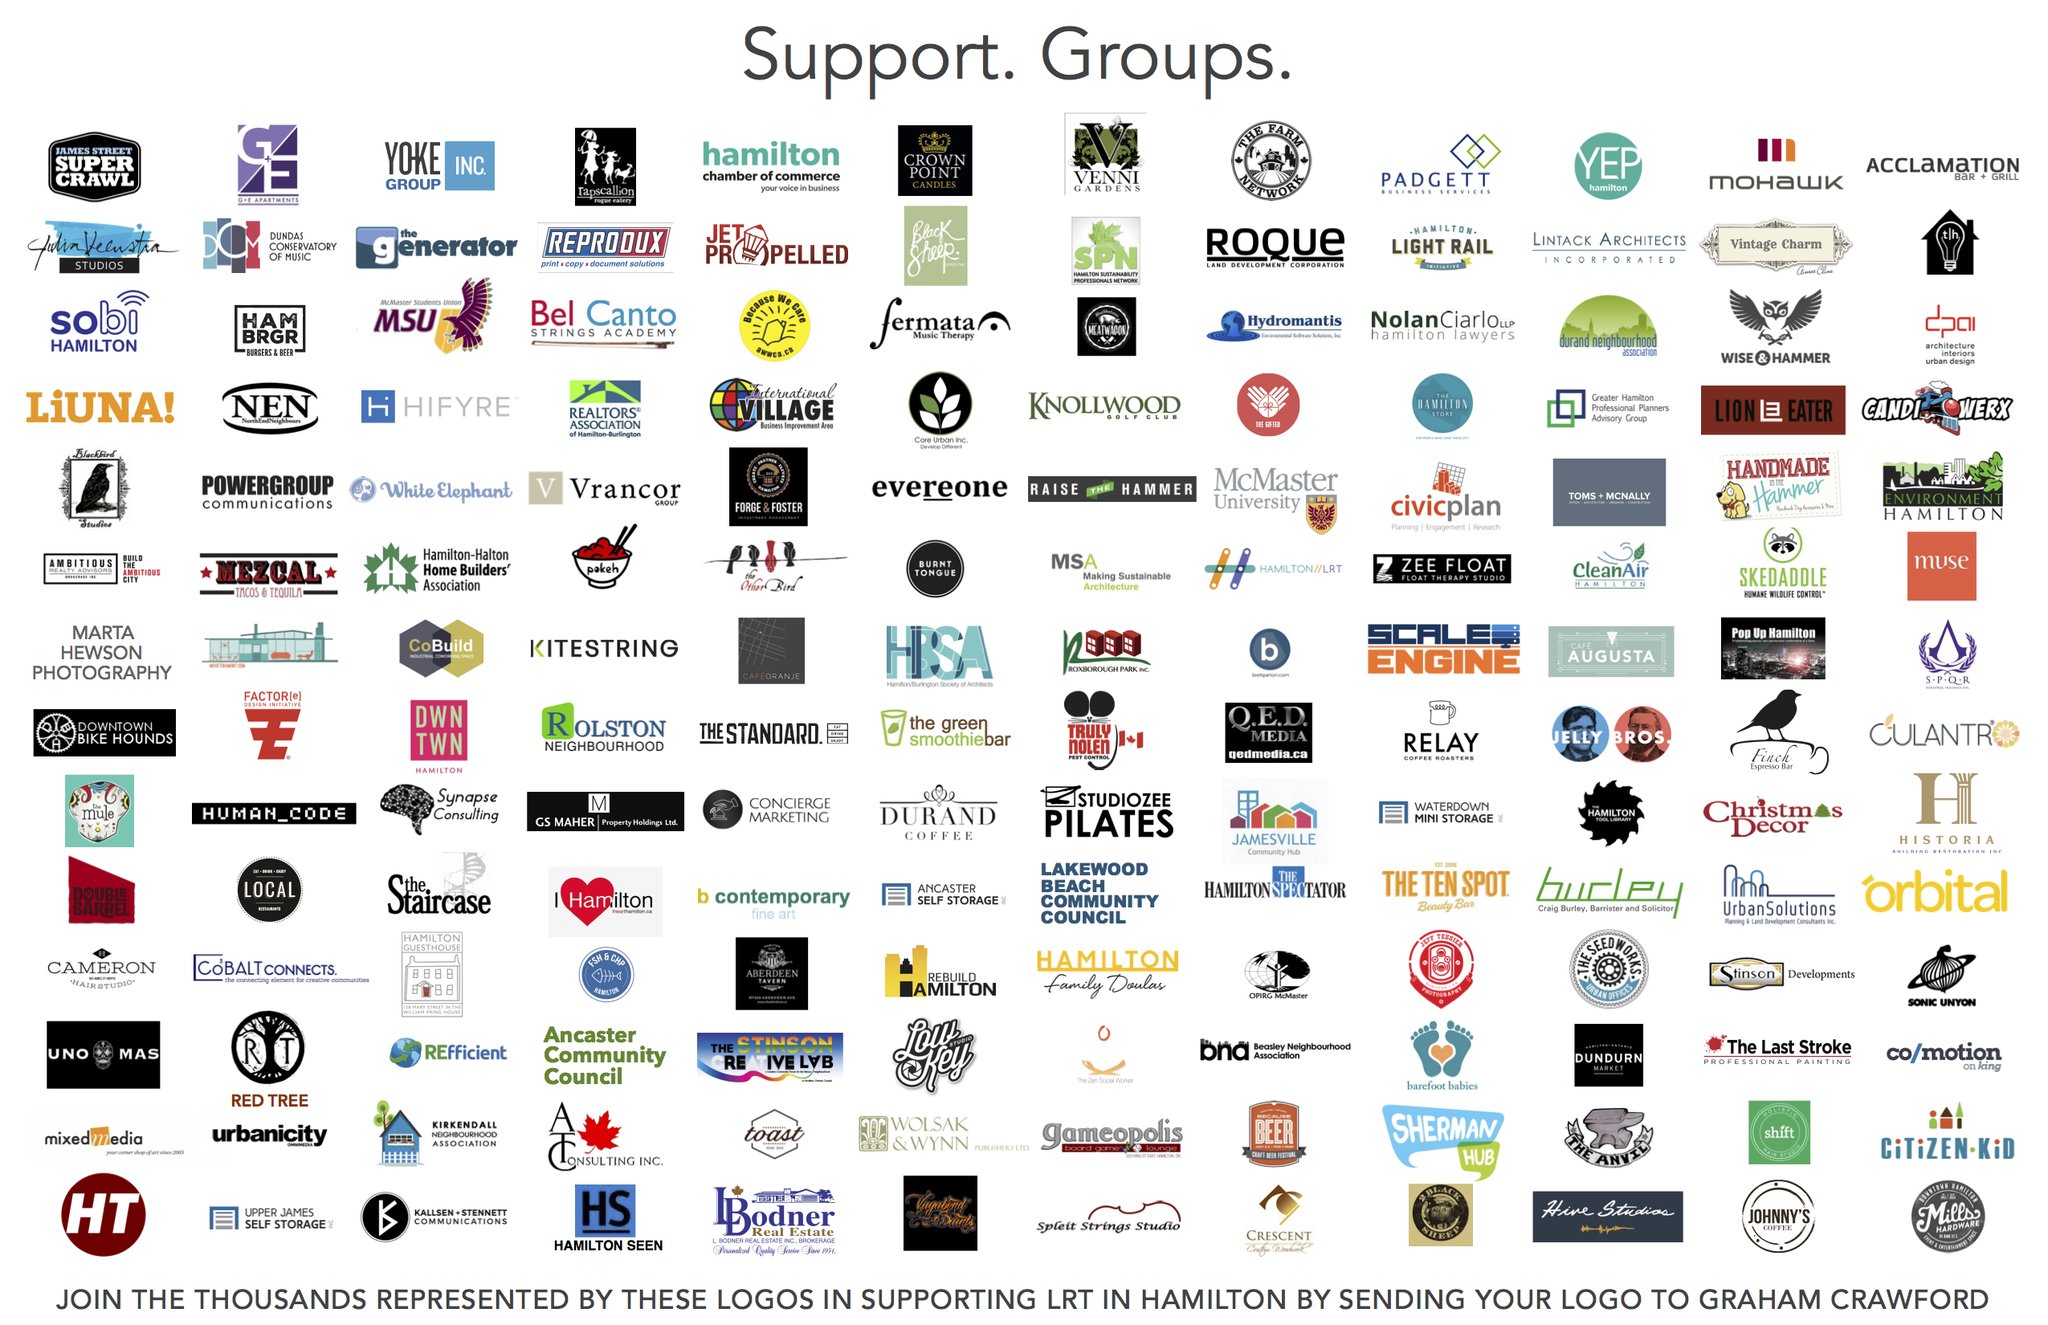 LRT Support Groups, up to 168 organizations now